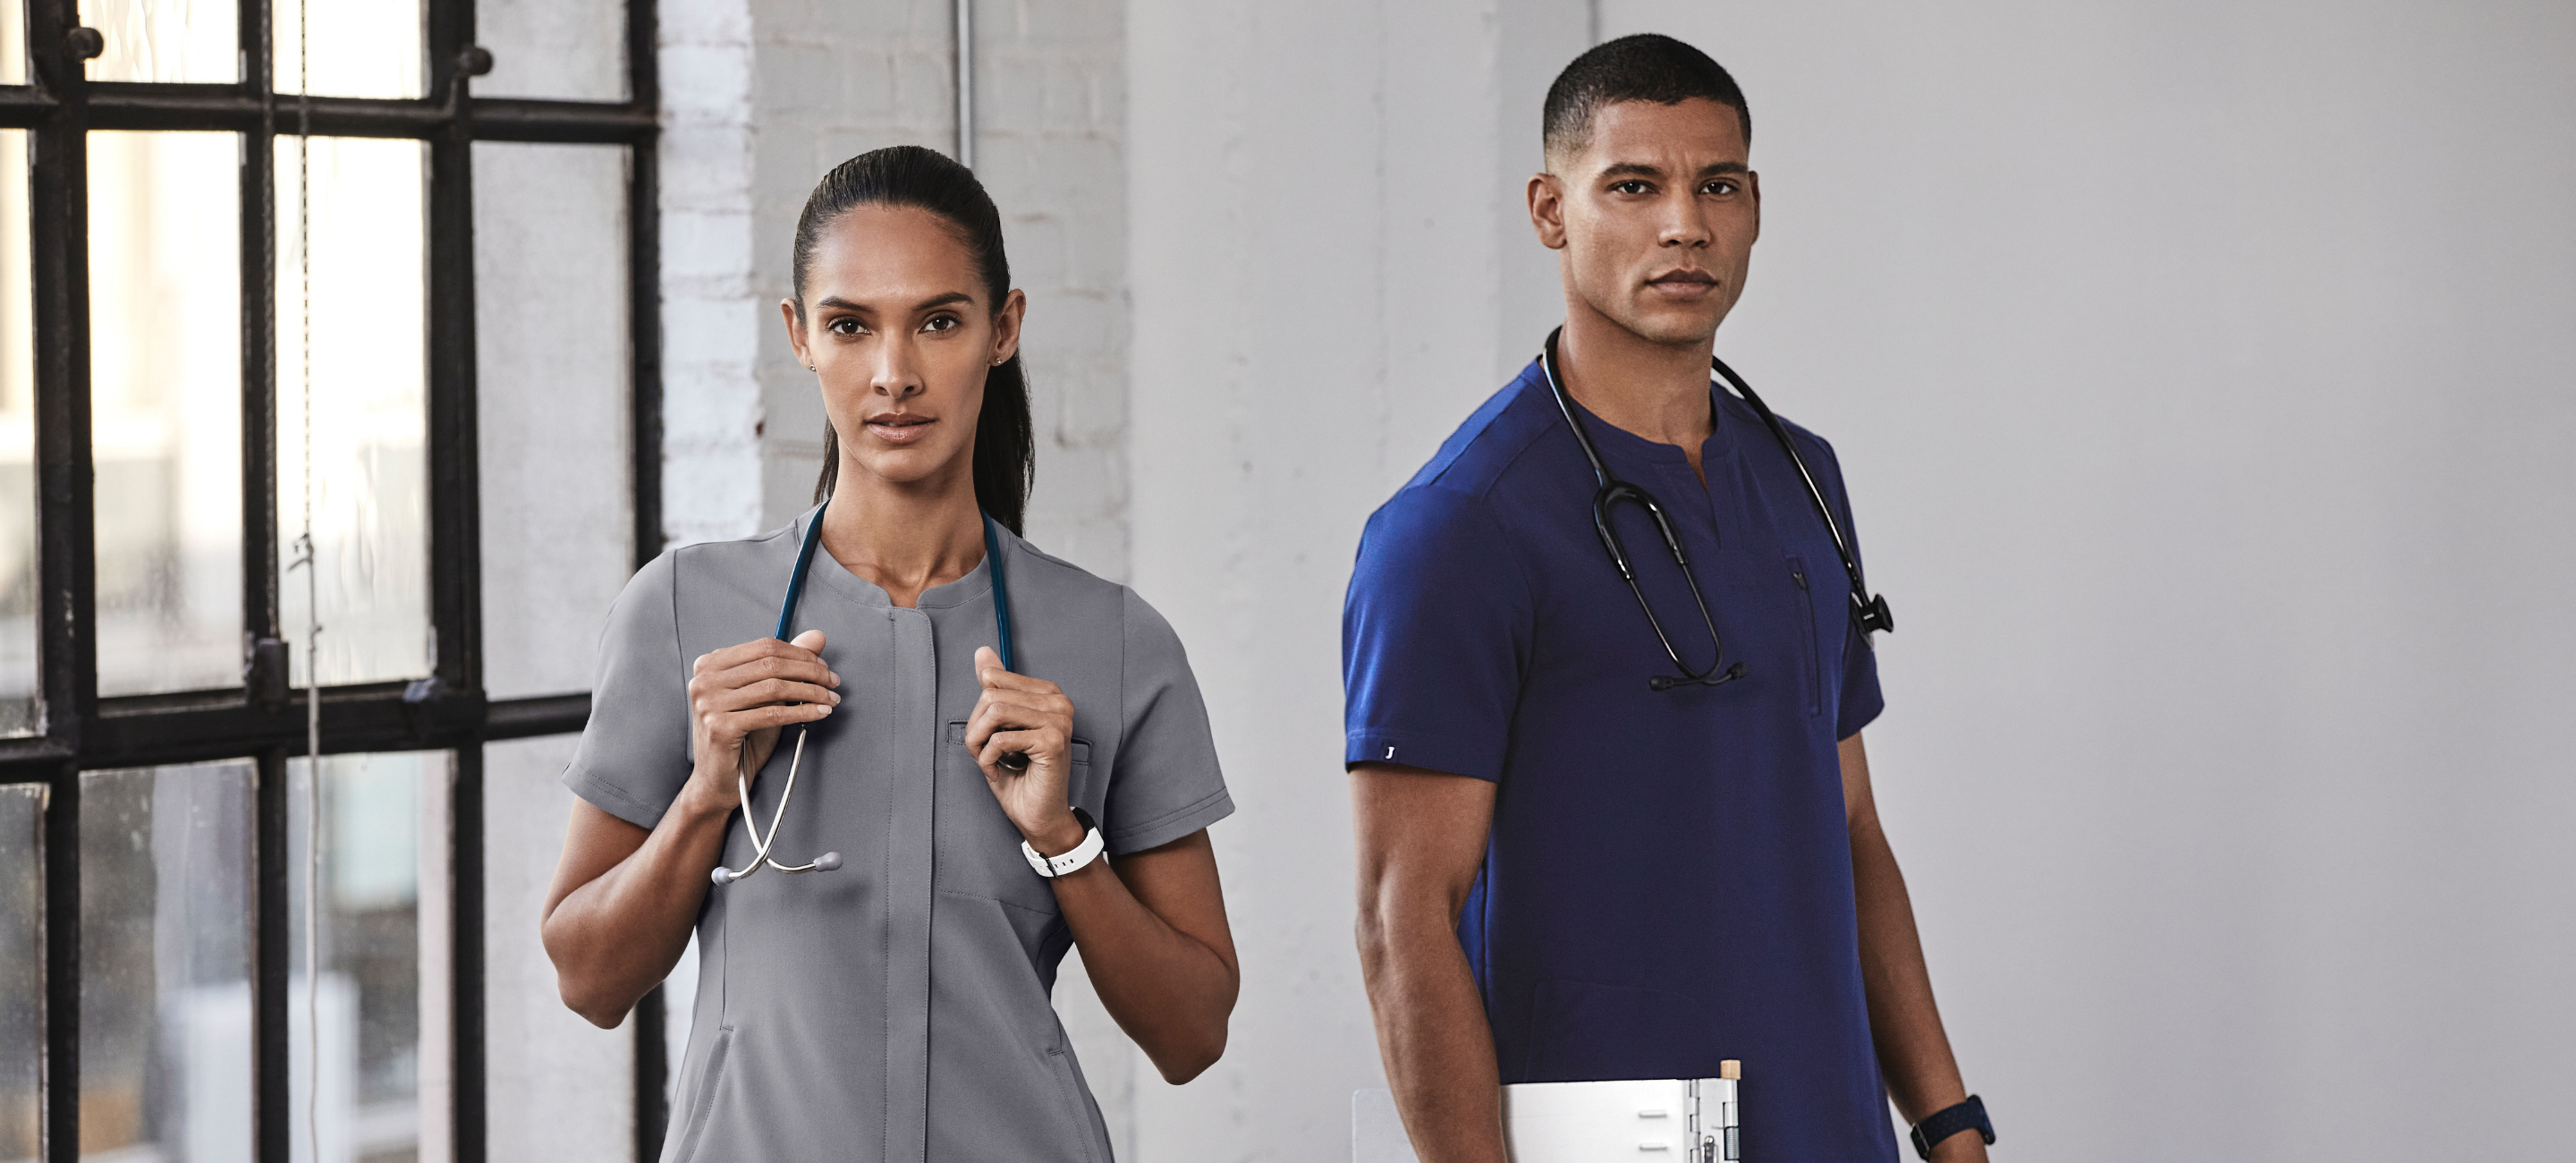 What are 3 fashionable scrubs to make you feel stylish at the hospital? -  Quora